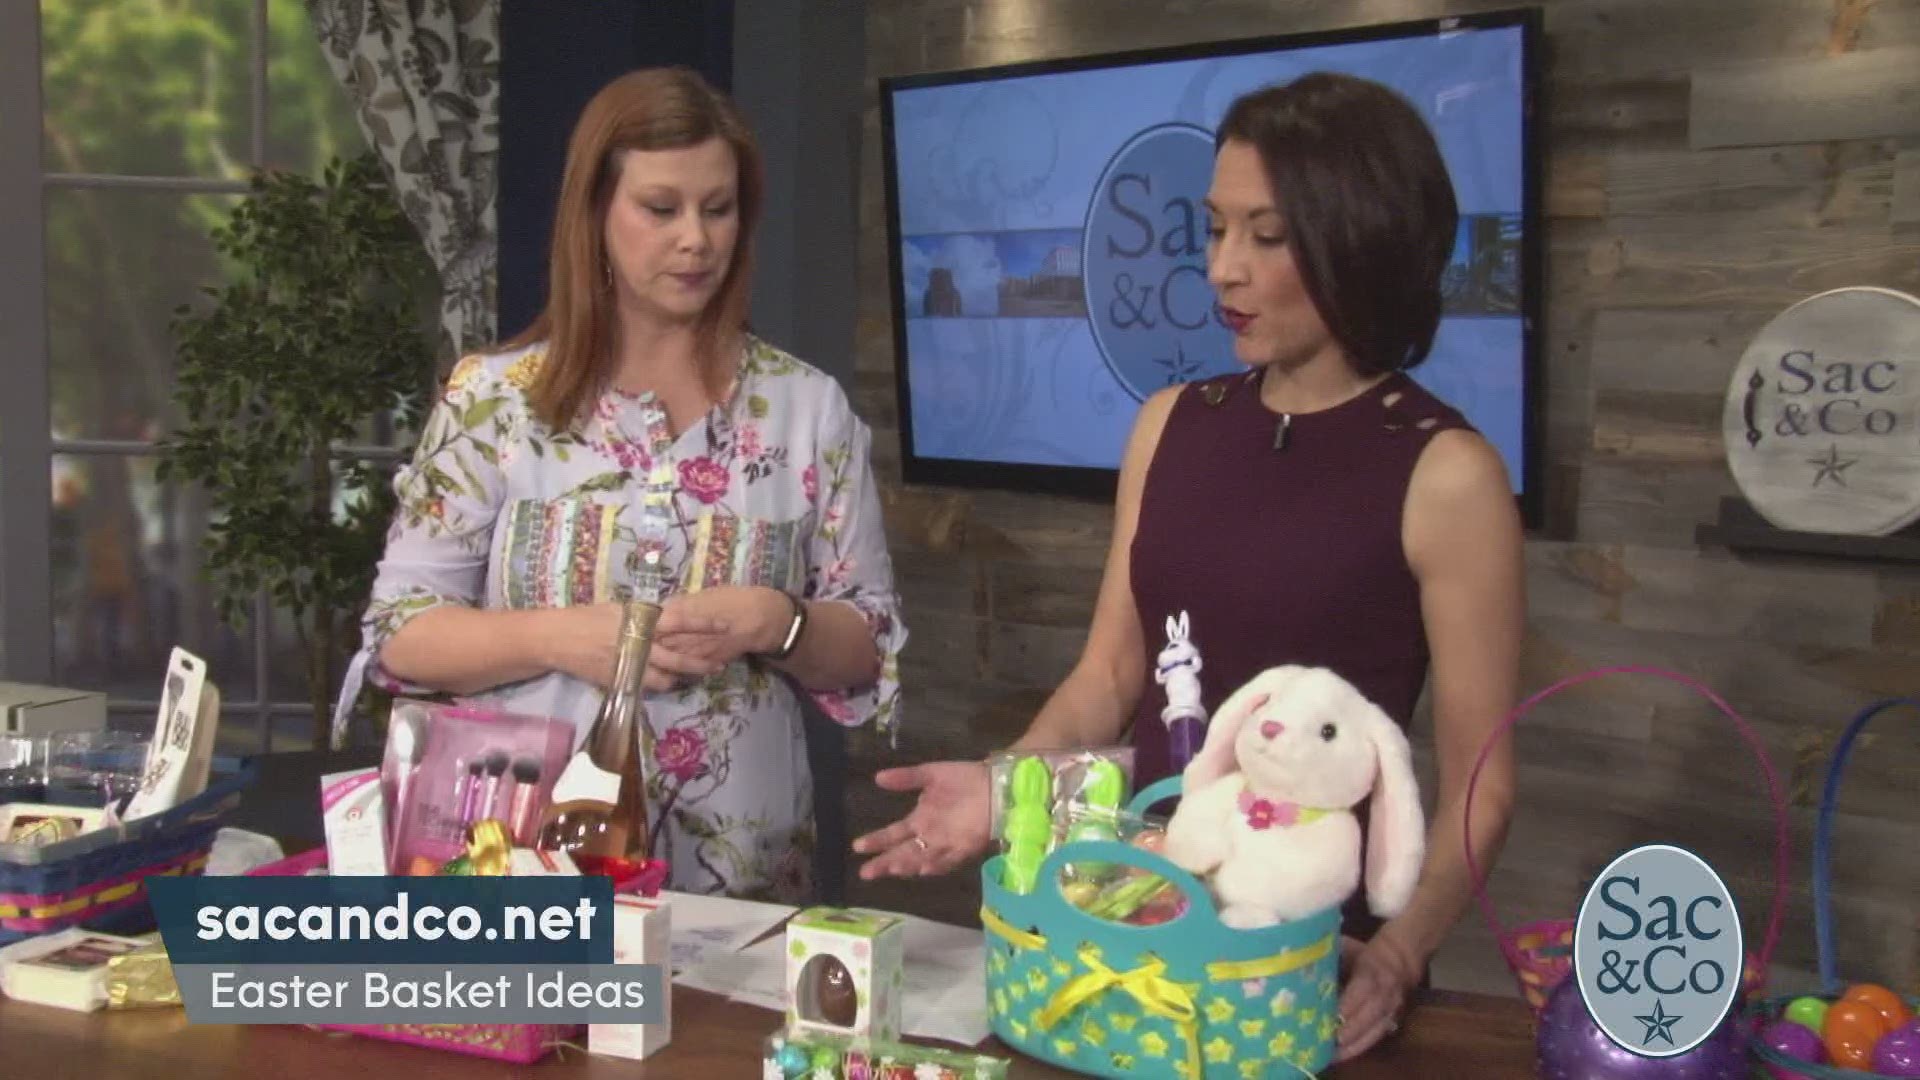 Easter baskets don’t have to just be for the kiddos! Learn how to make Easter Baskets for the kids AND adults this Easter!